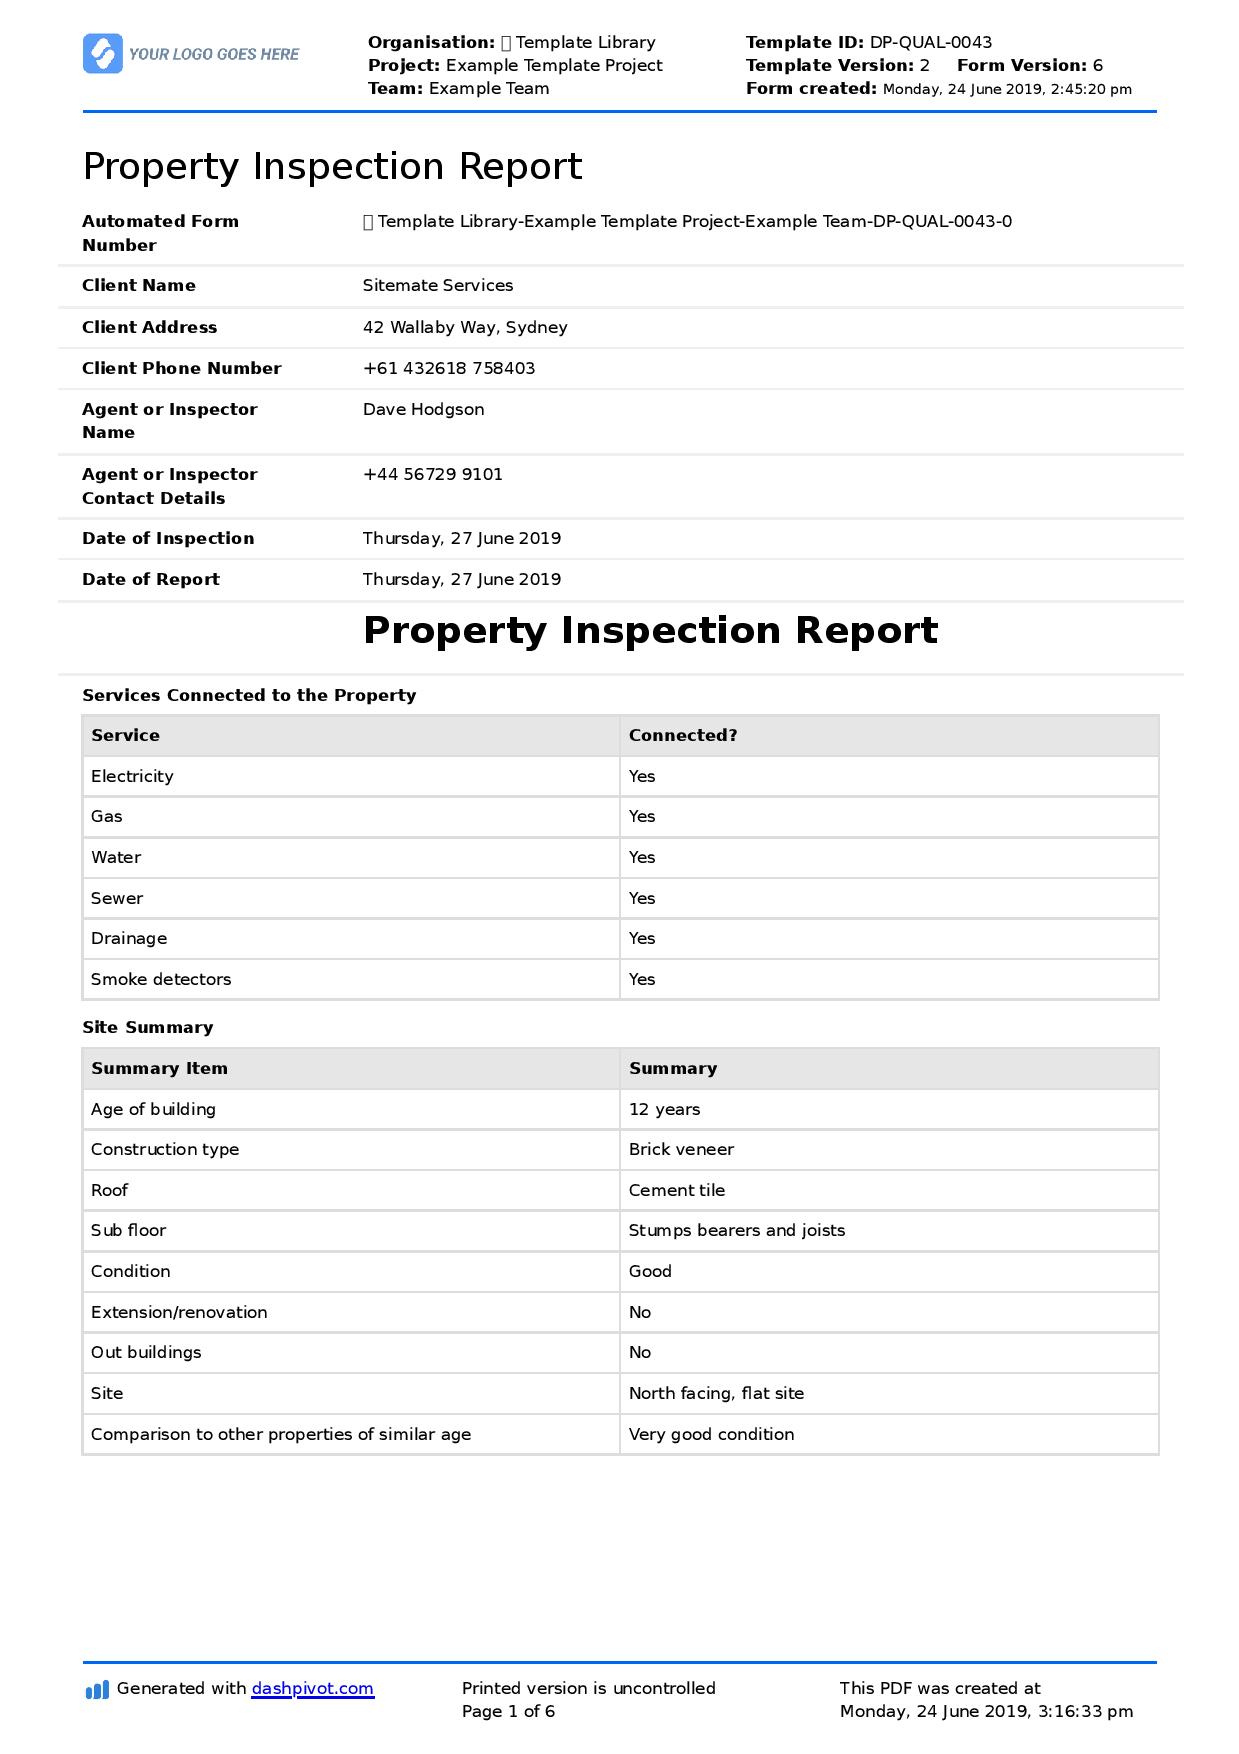 Property Inspection Report template (Free and customisable) In Home Inspection Report Template Free